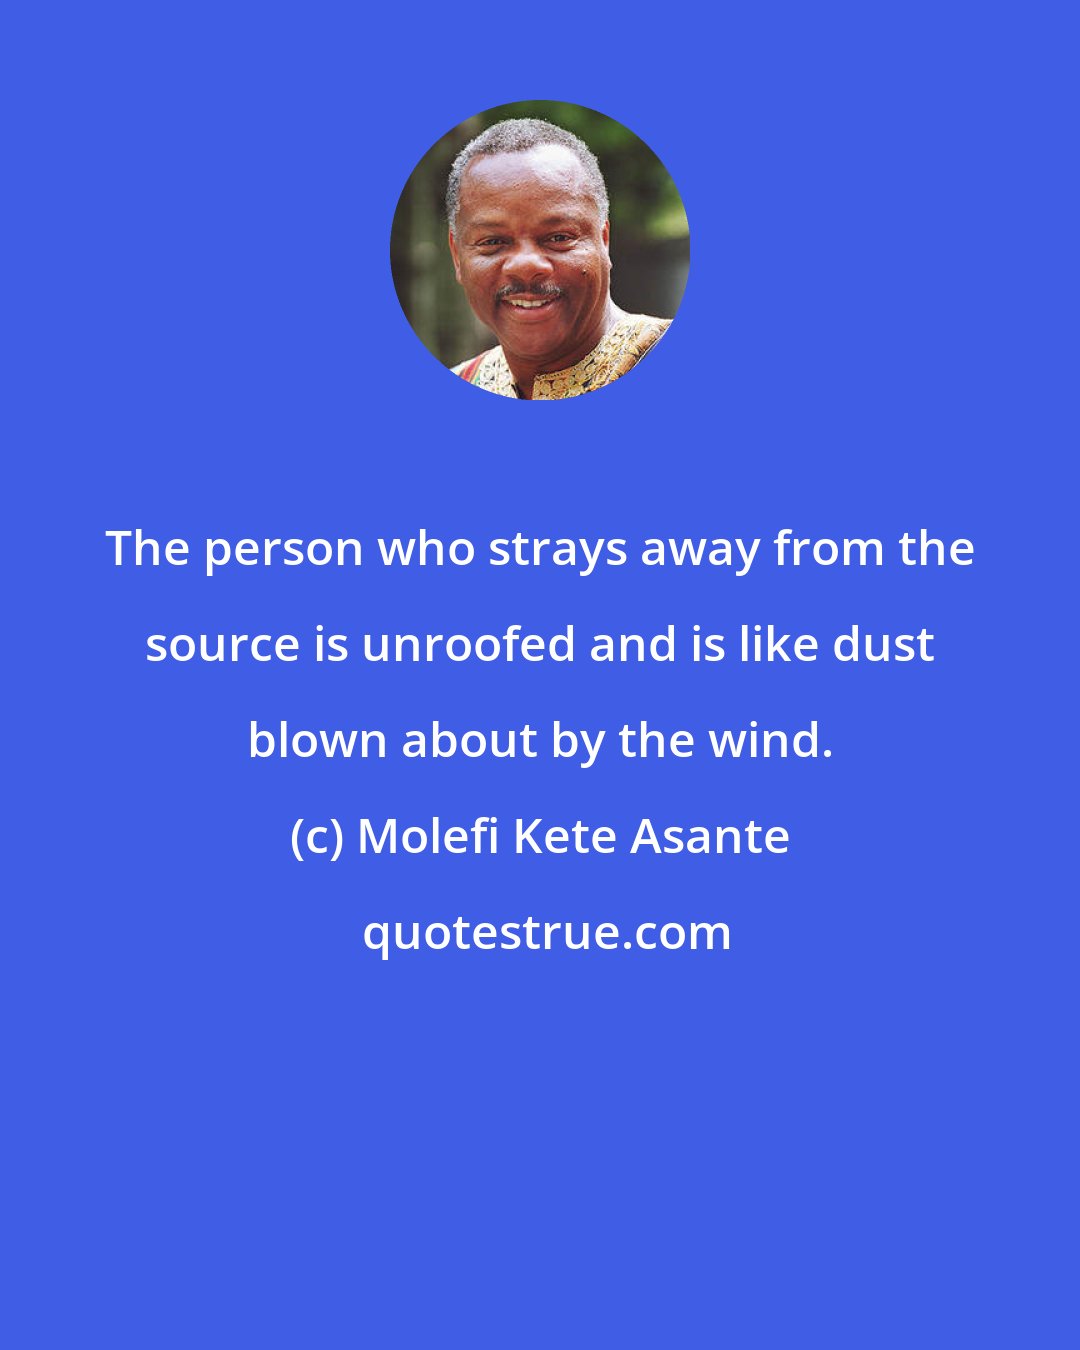 Molefi Kete Asante: The person who strays away from the source is unroofed and is like dust blown about by the wind.